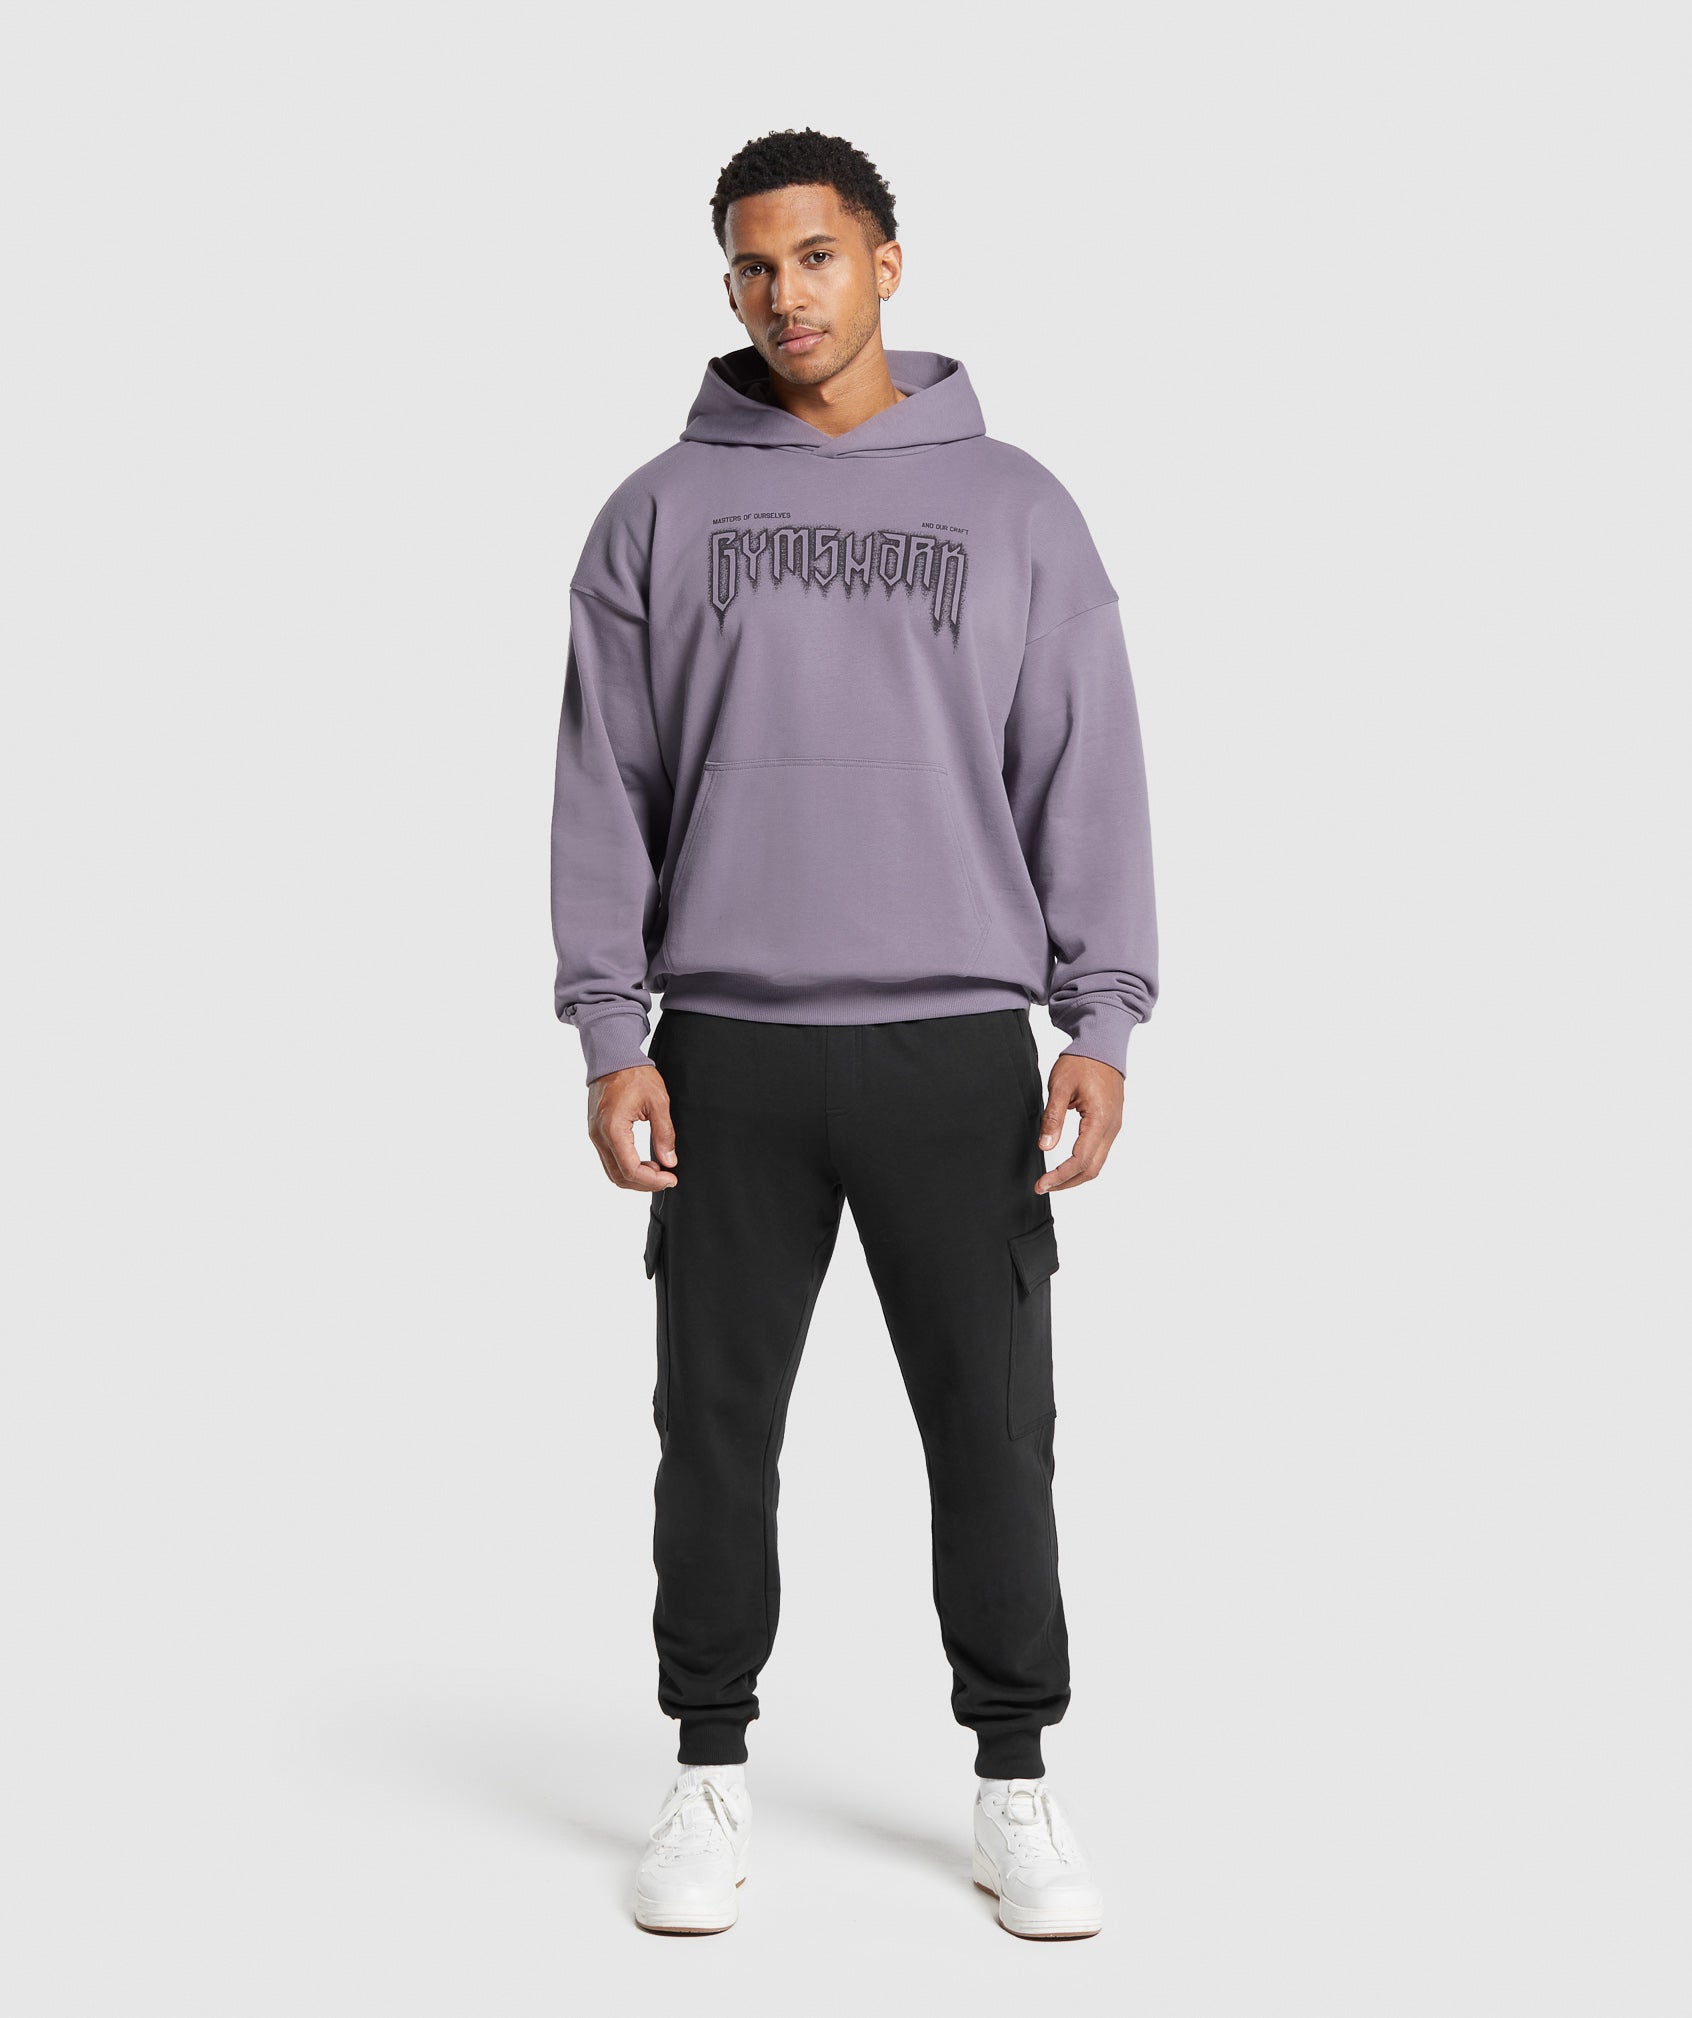 Masters of Our Craft Hoodie in Fog Purple - view 4